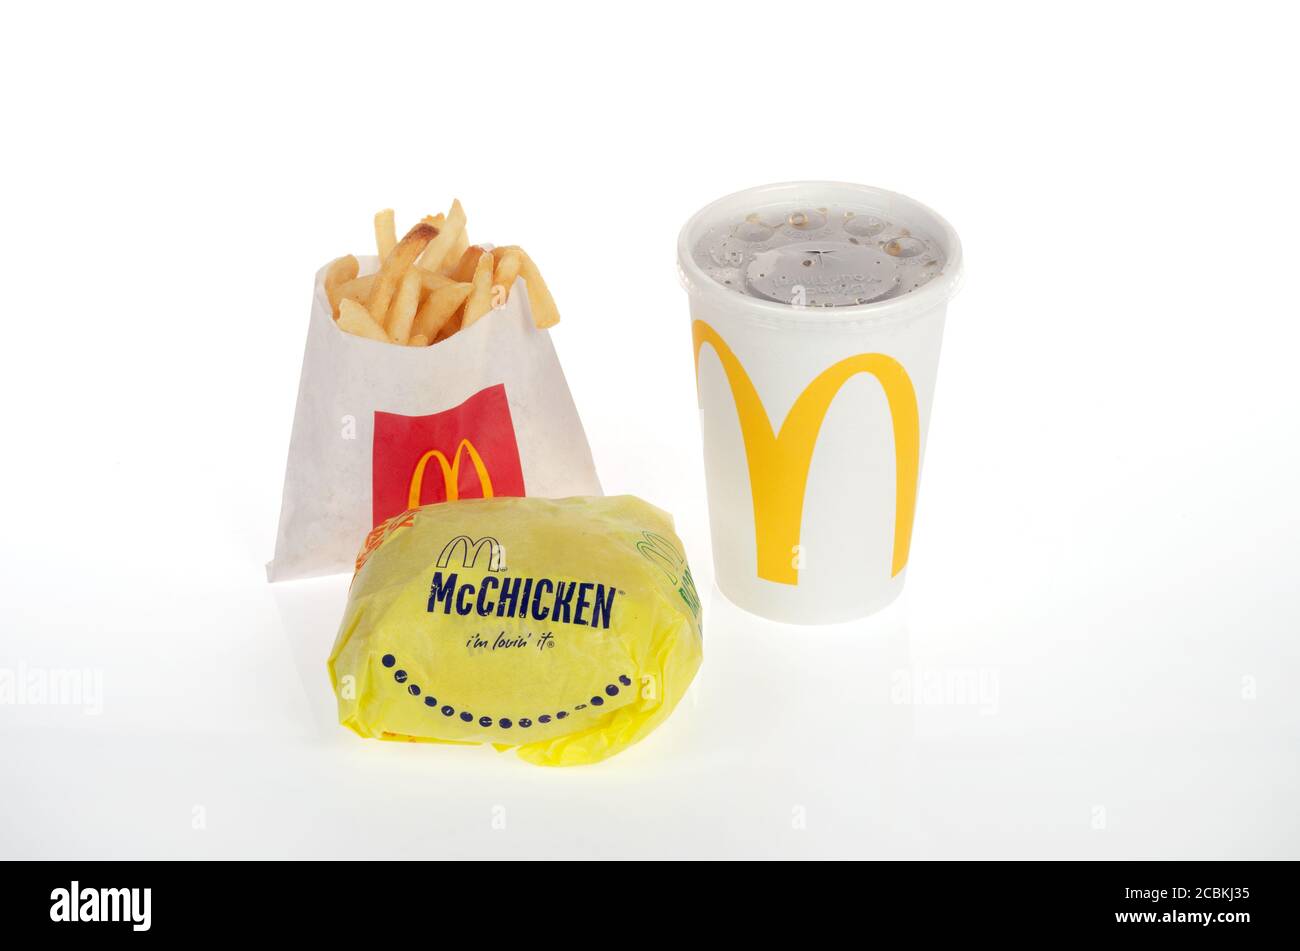 McDonald’s McChicken Chicken Sandwich with french fries or chips & soda Stock Photo